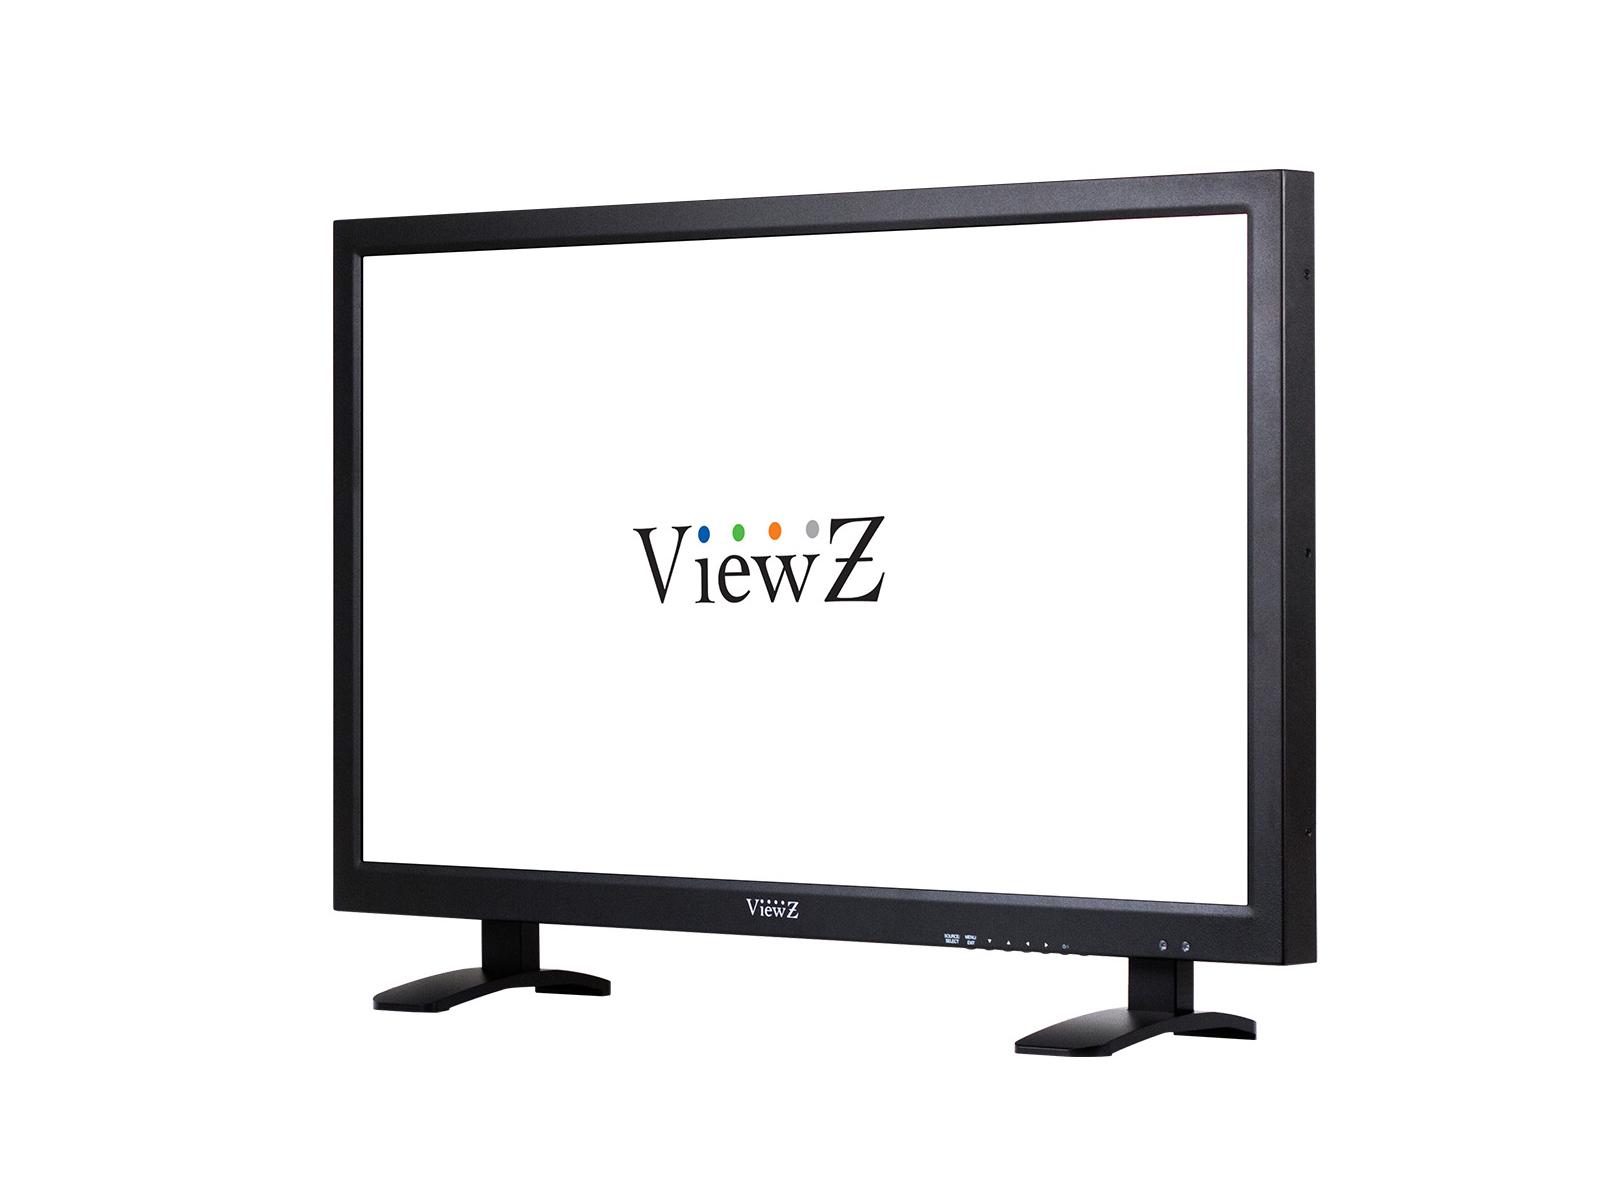 VZ-32IPM 32 inch 1920x1080 Full HD LED IP Input Monitor with Android OS by ViewZ